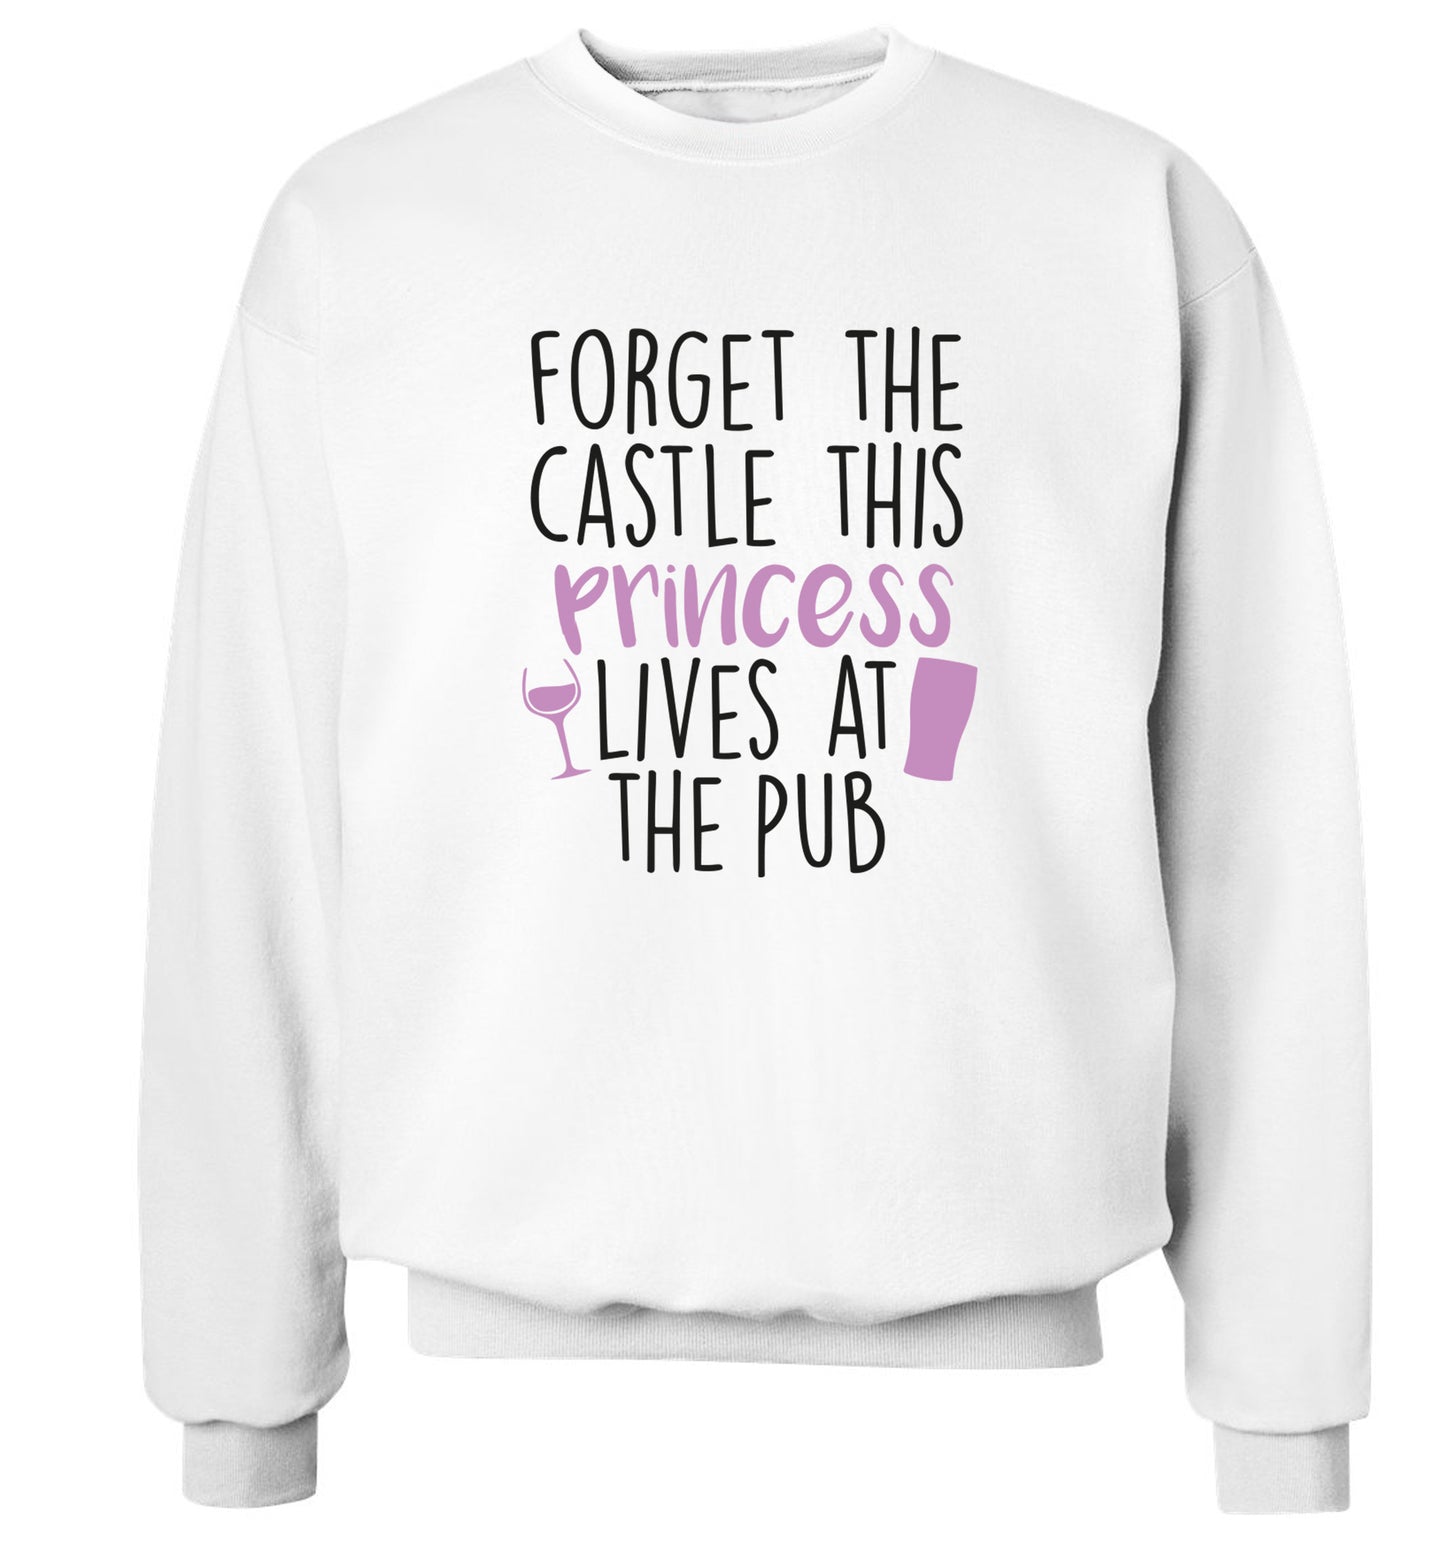 Forget the castle this princess lives at the pub Adult's unisex white Sweater 2XL